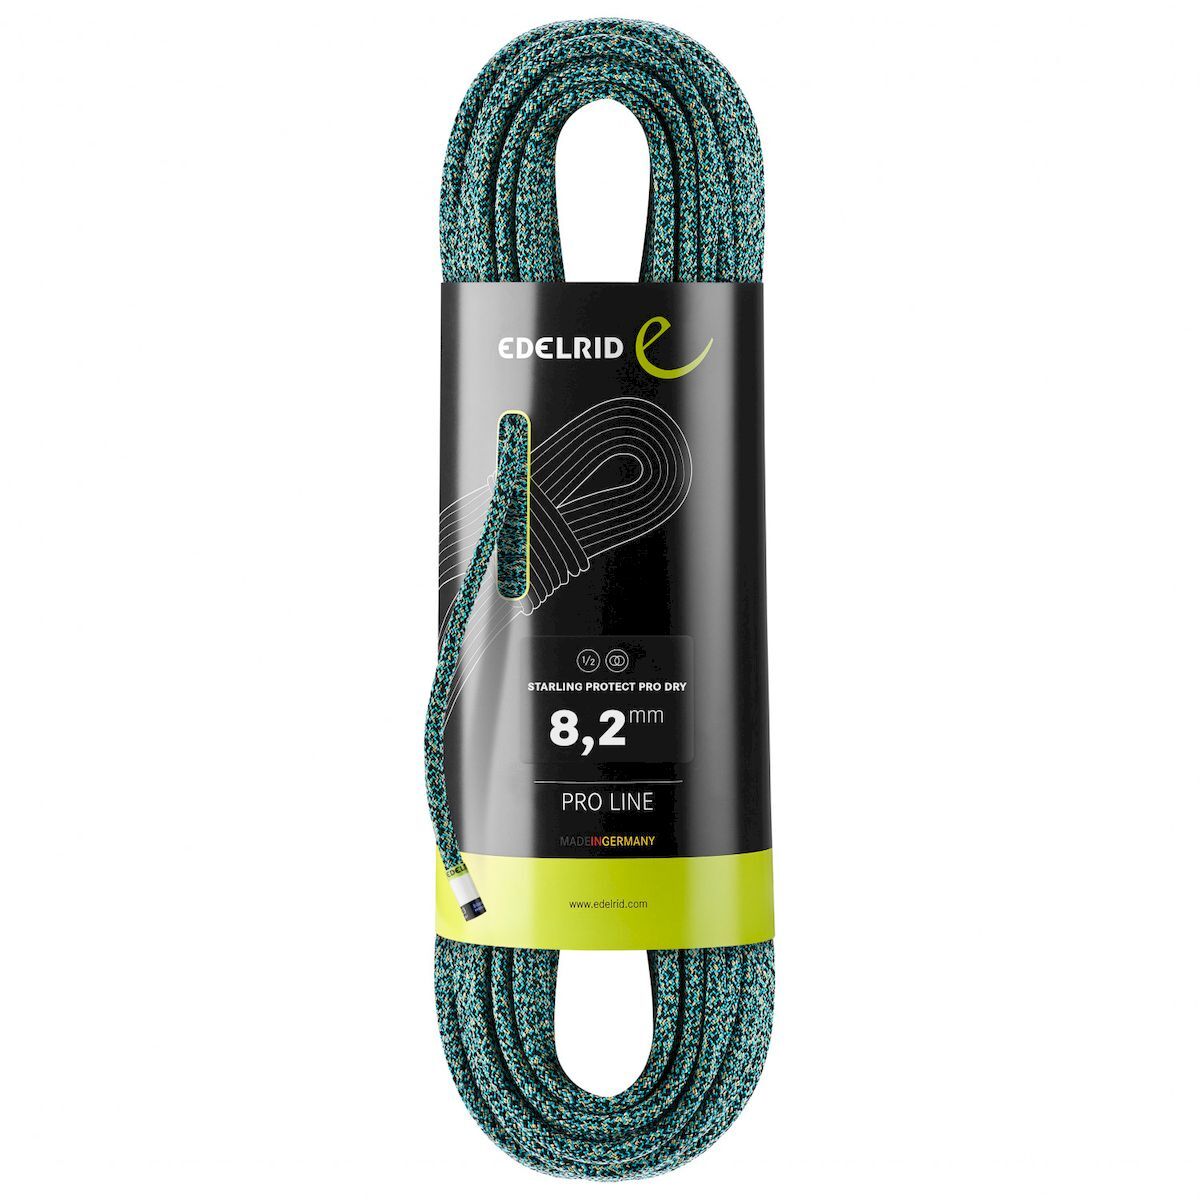 Edelrid Starling Protect Pro Dry 8,2 mm - Halvreb